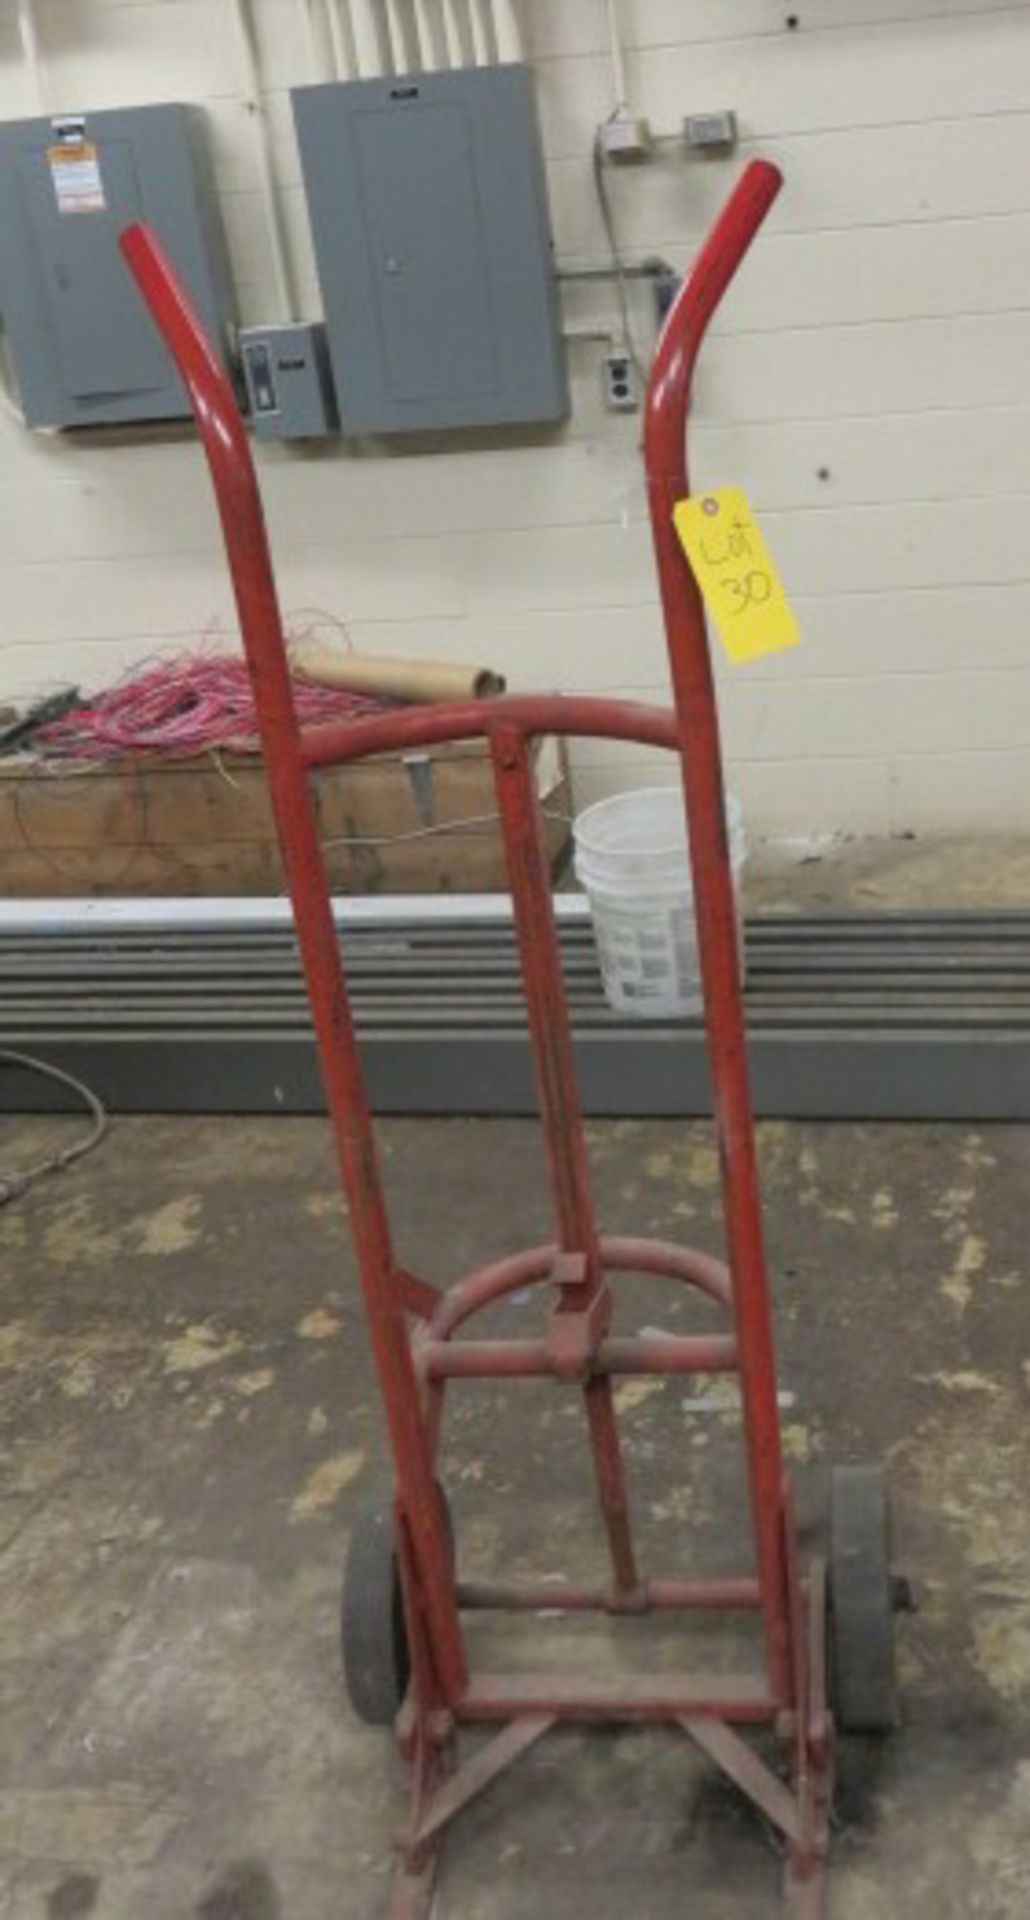 BARREL DOLLY [RIGGING FEES FOR LOT #30 - $30 USD PLUS APPLICABLE TAXES]